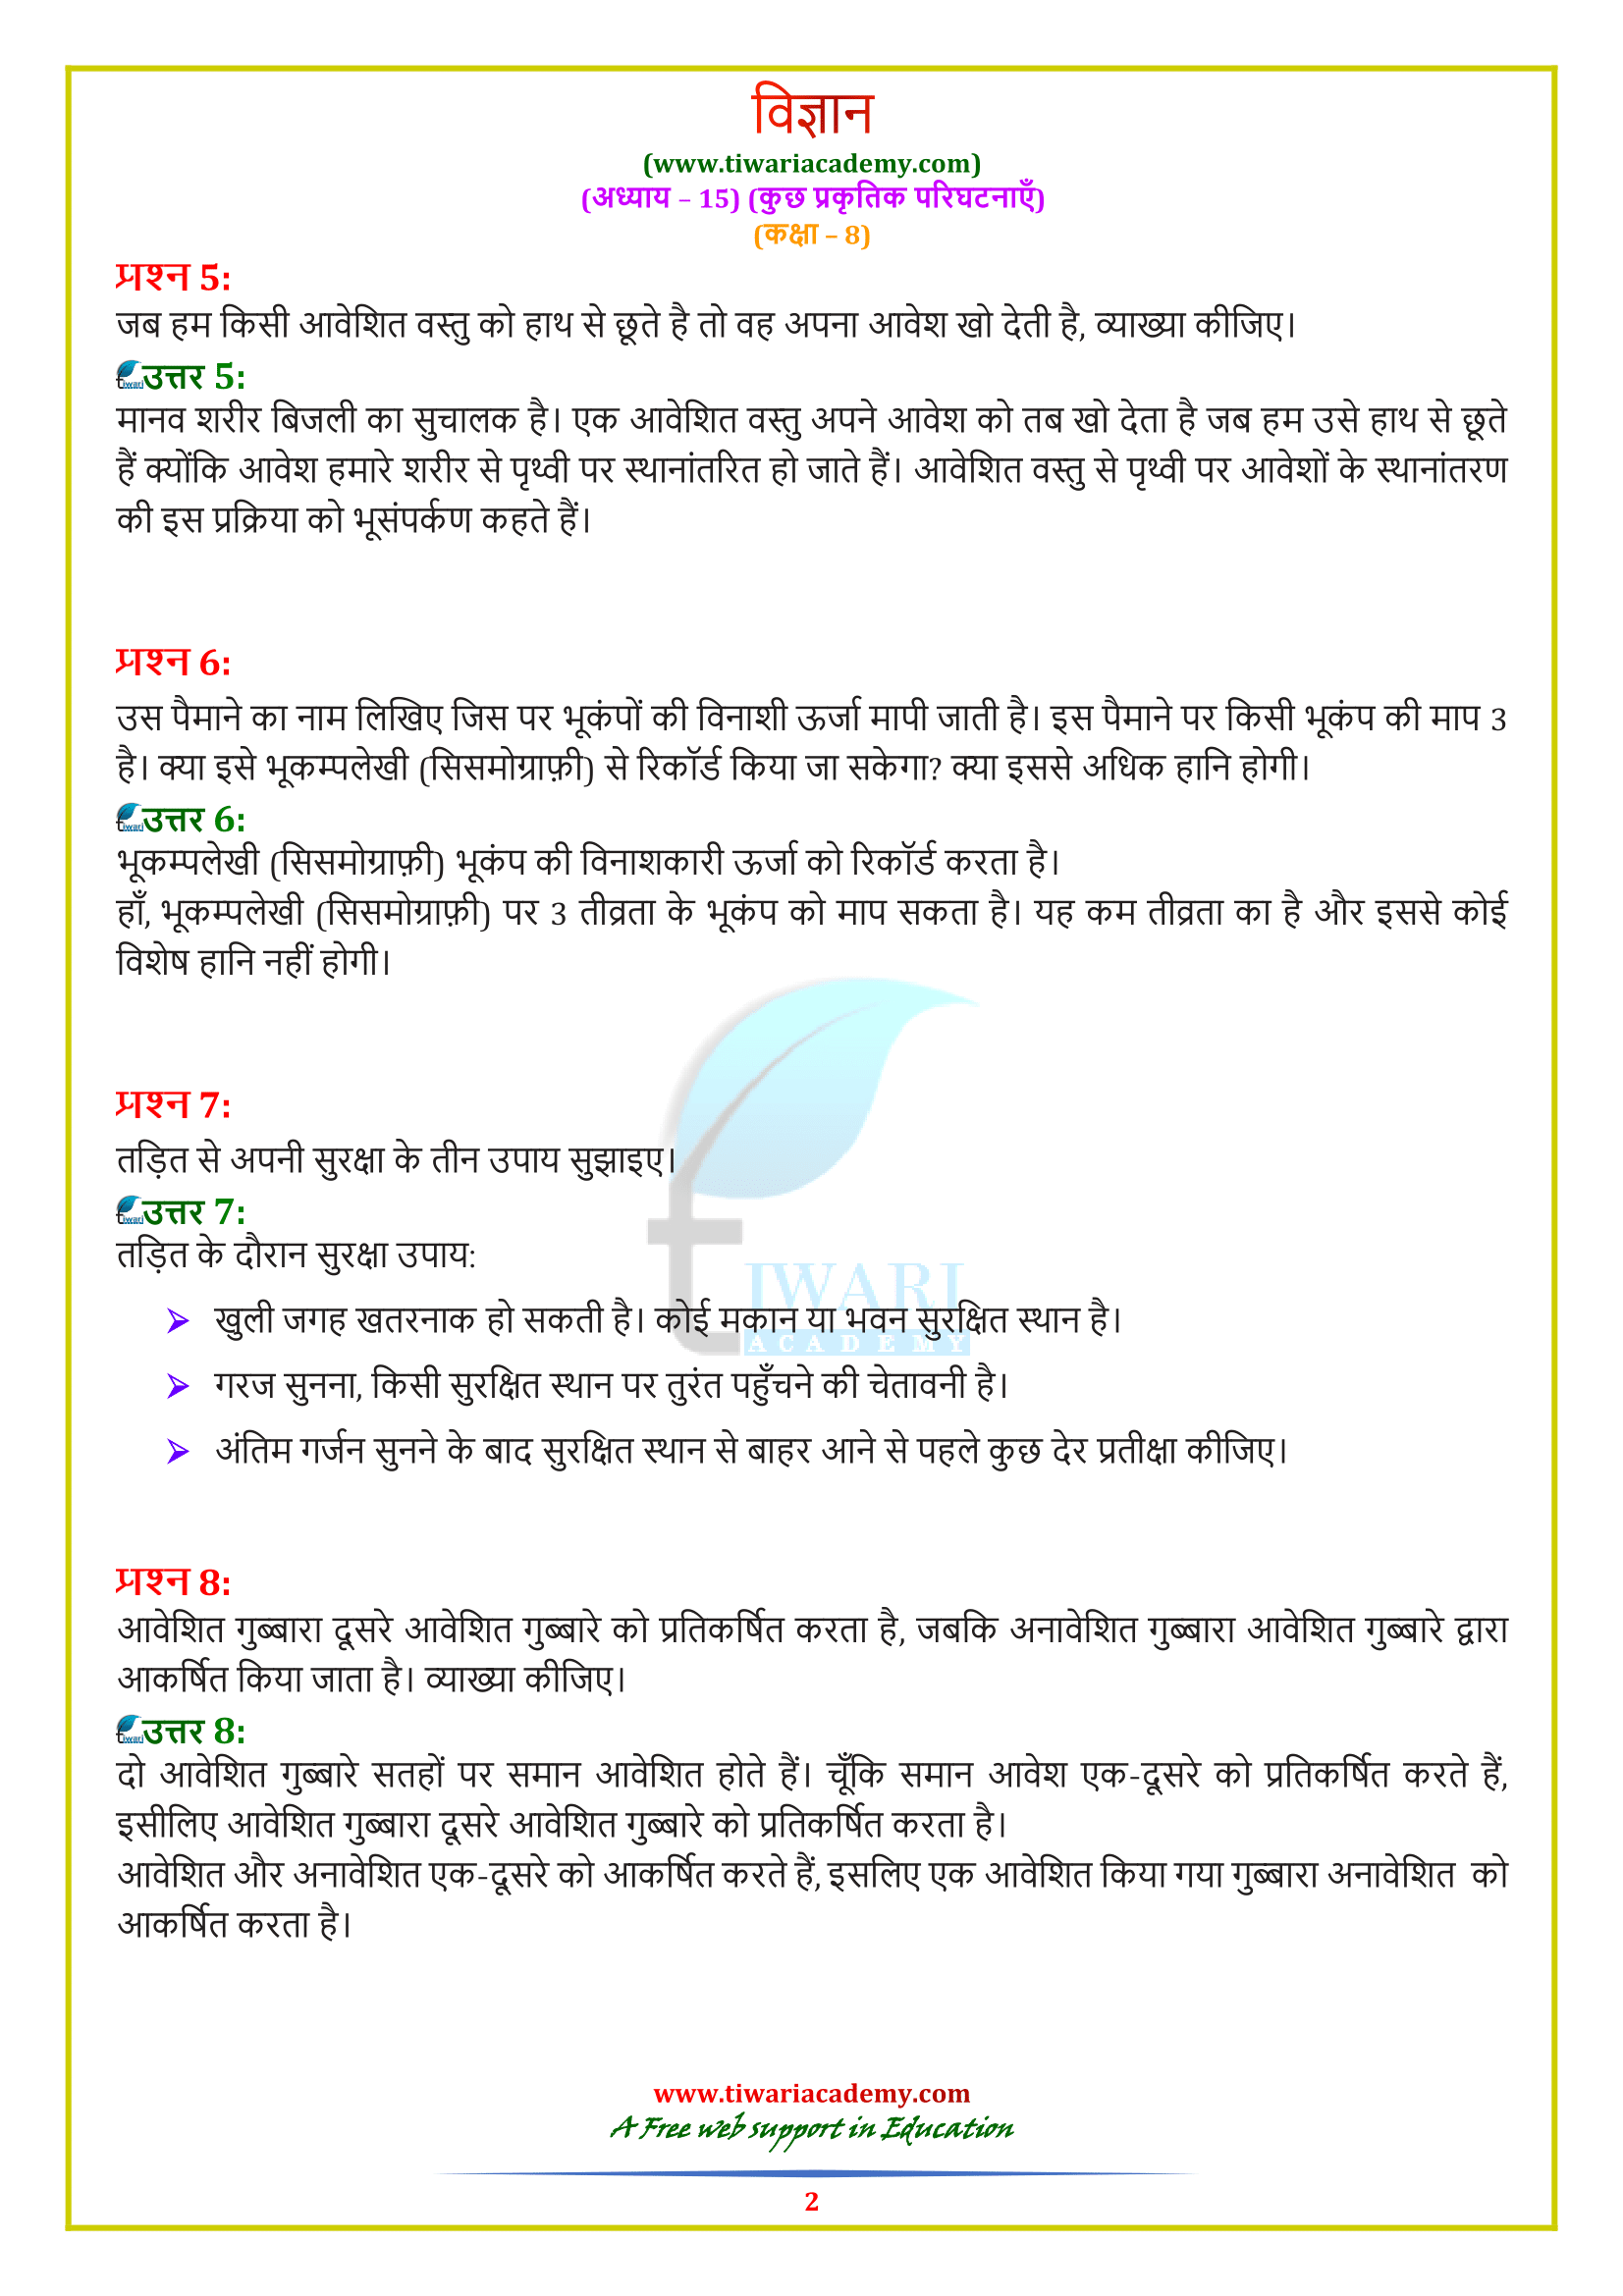 NCERT Solutions for Class 8 Science Chapter 15 in Hindi Medium